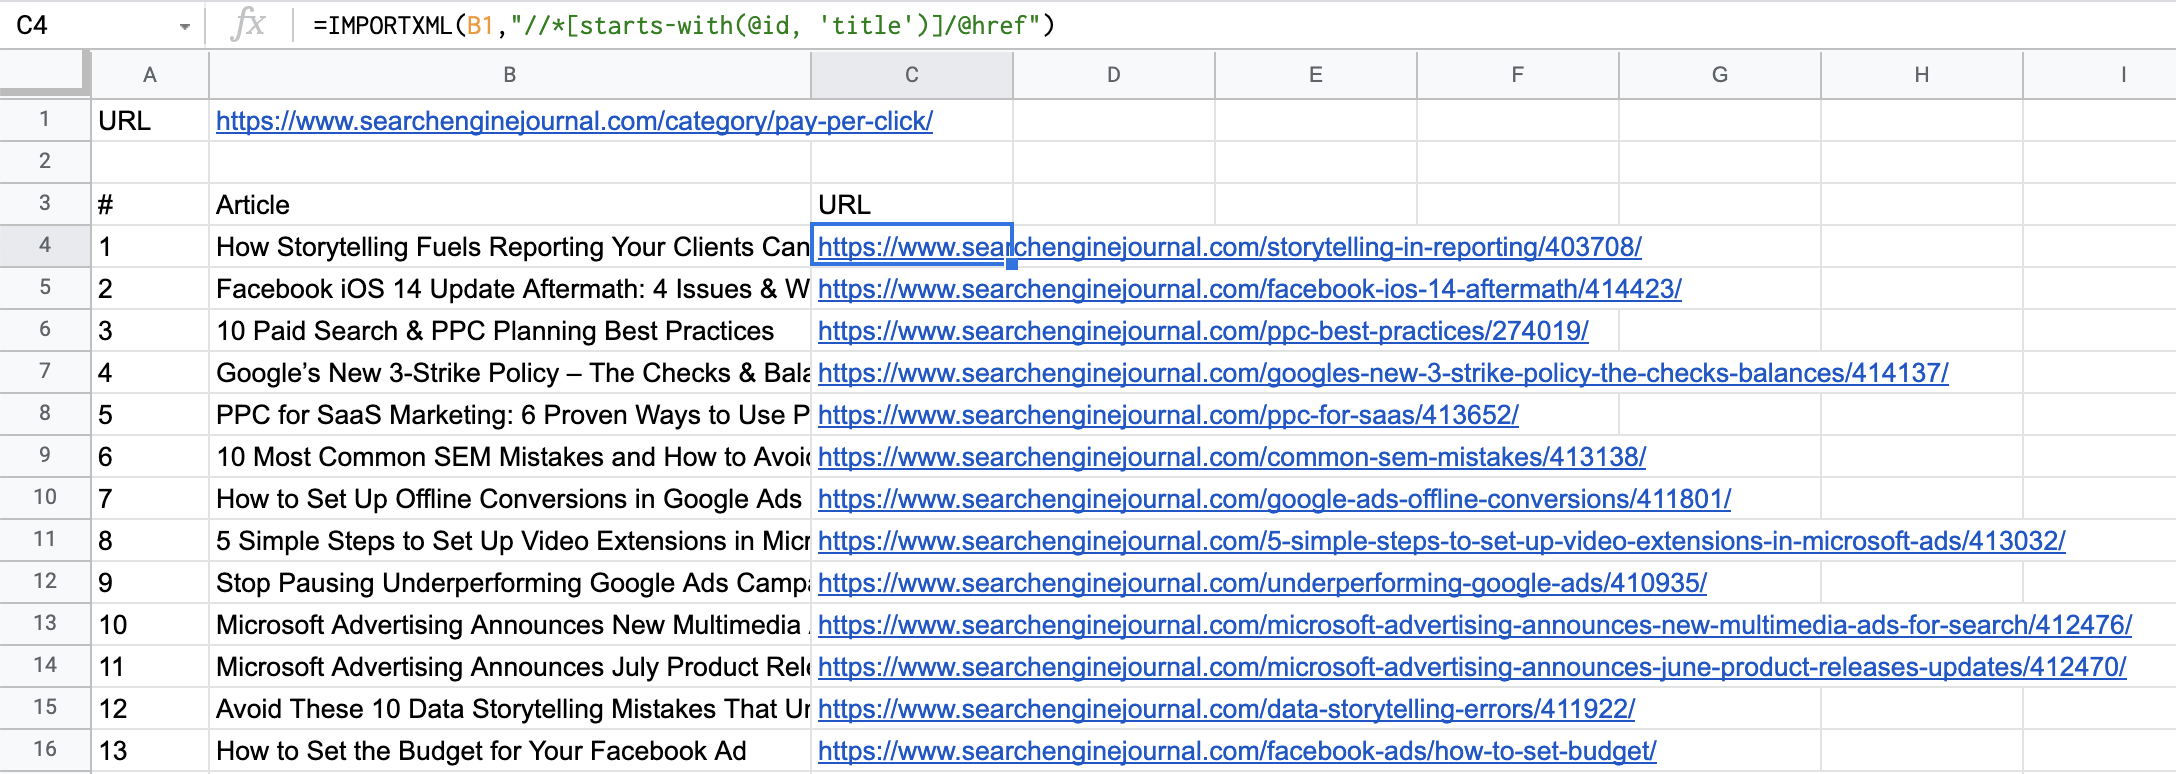 Articles and URLs imported into Google Sheets.